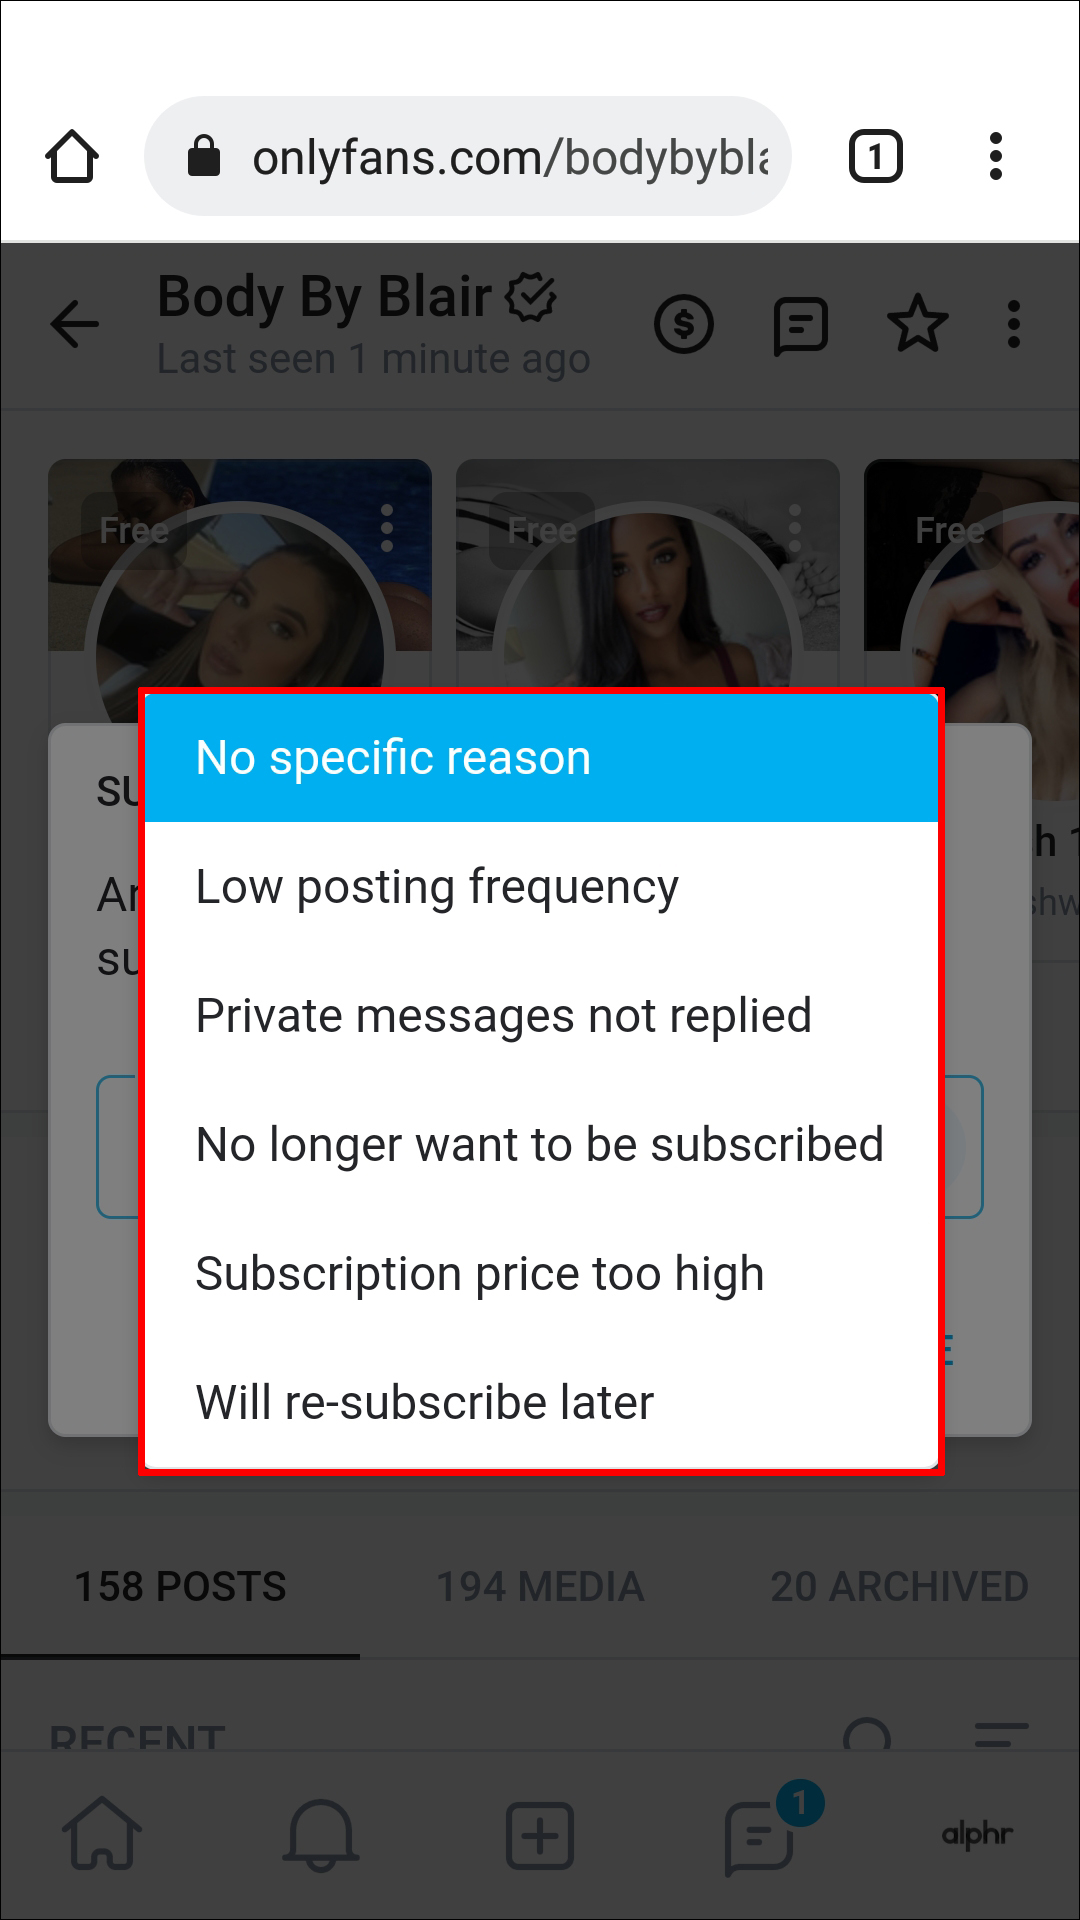 How to cancel a onlyfans subscription